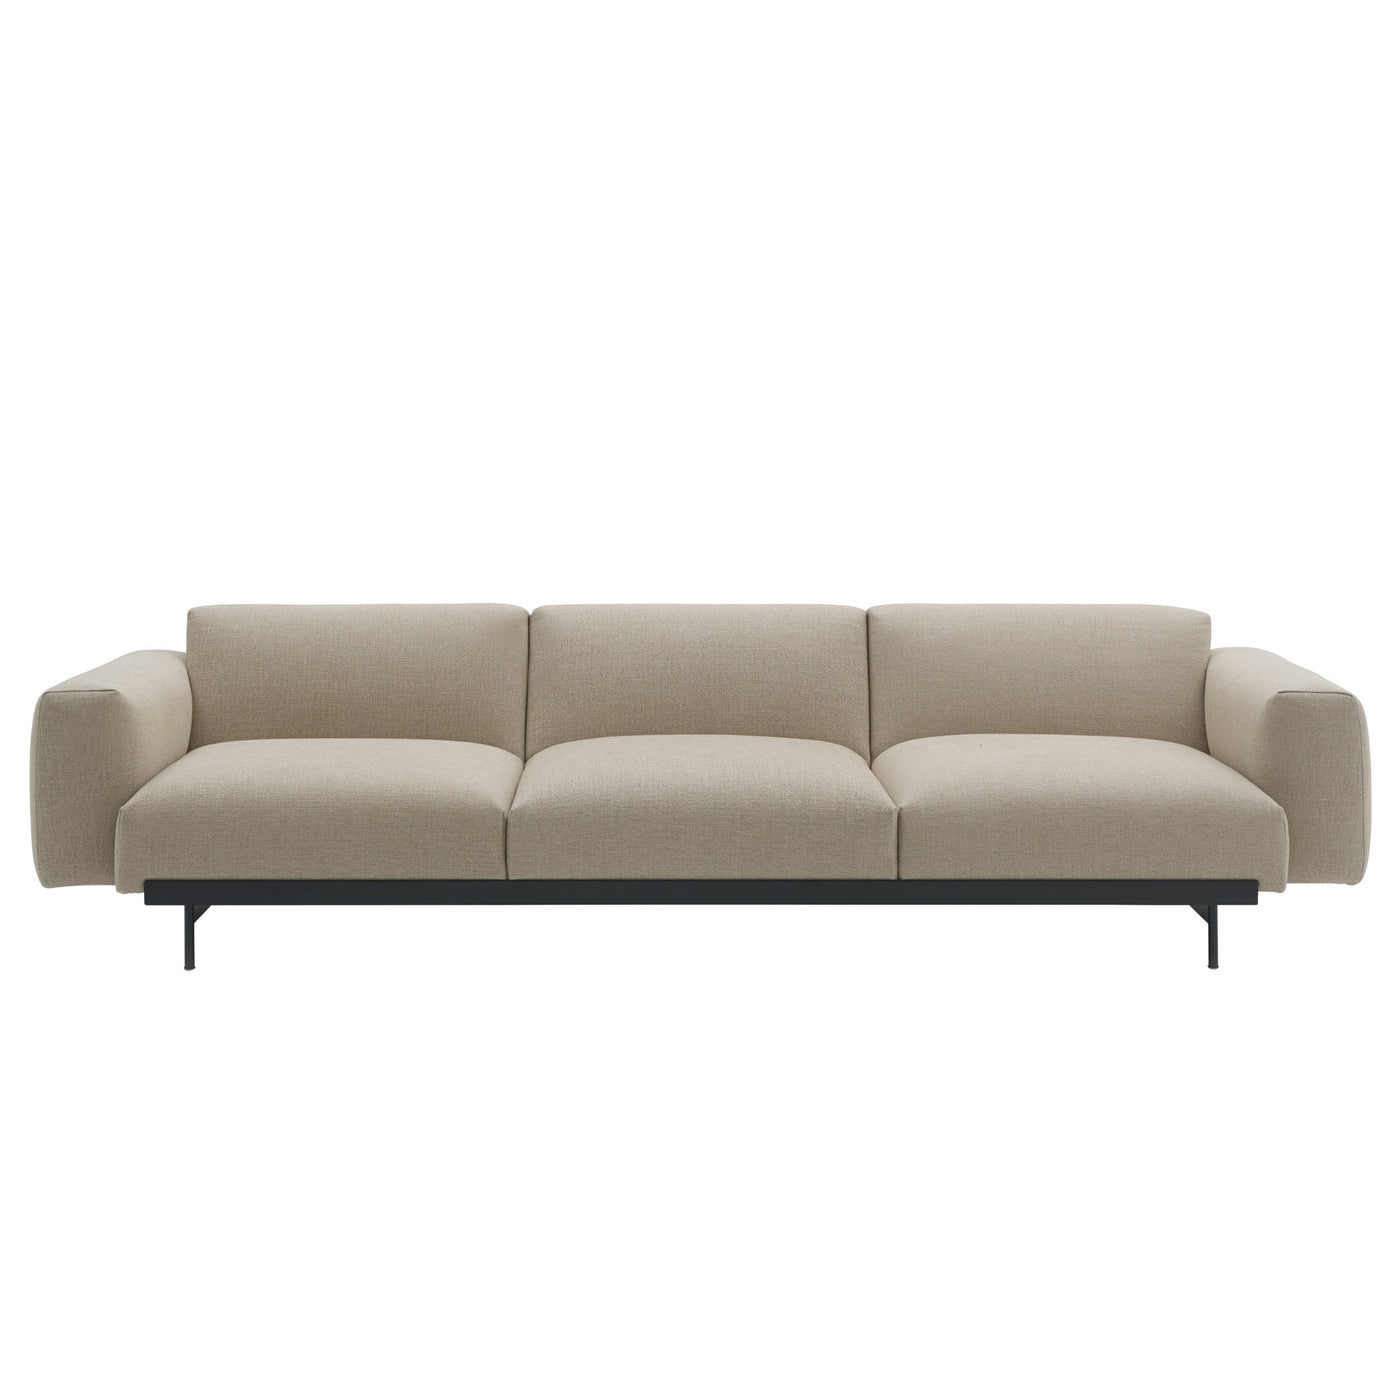 Muuto In Situ Modular 3 Seater Sofa, configuration 1. Made to order from someday designs. #colour_ecriture-240